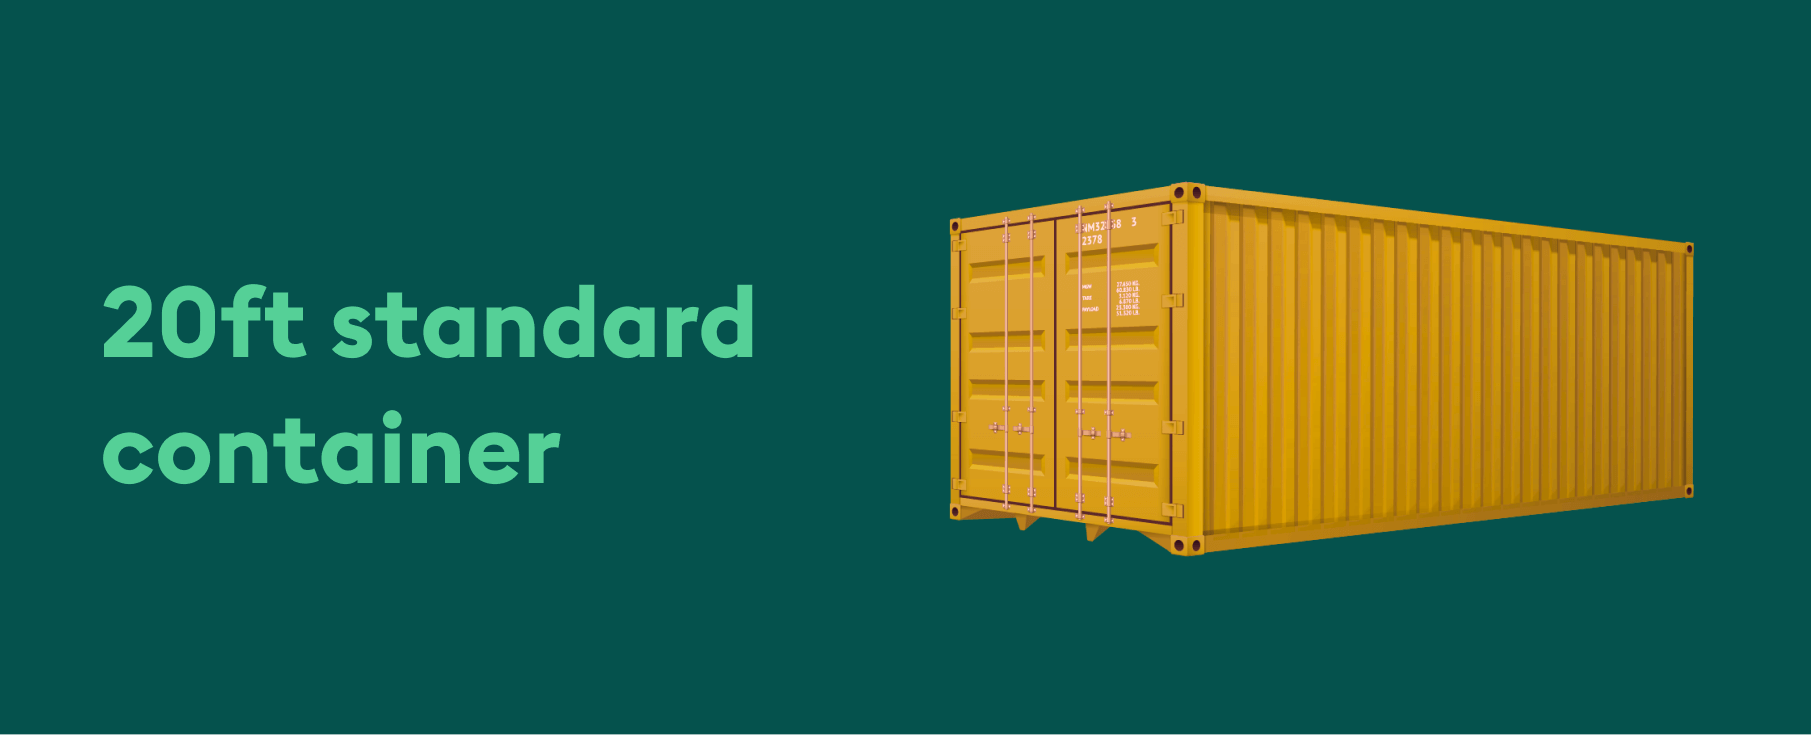 20ft standard container